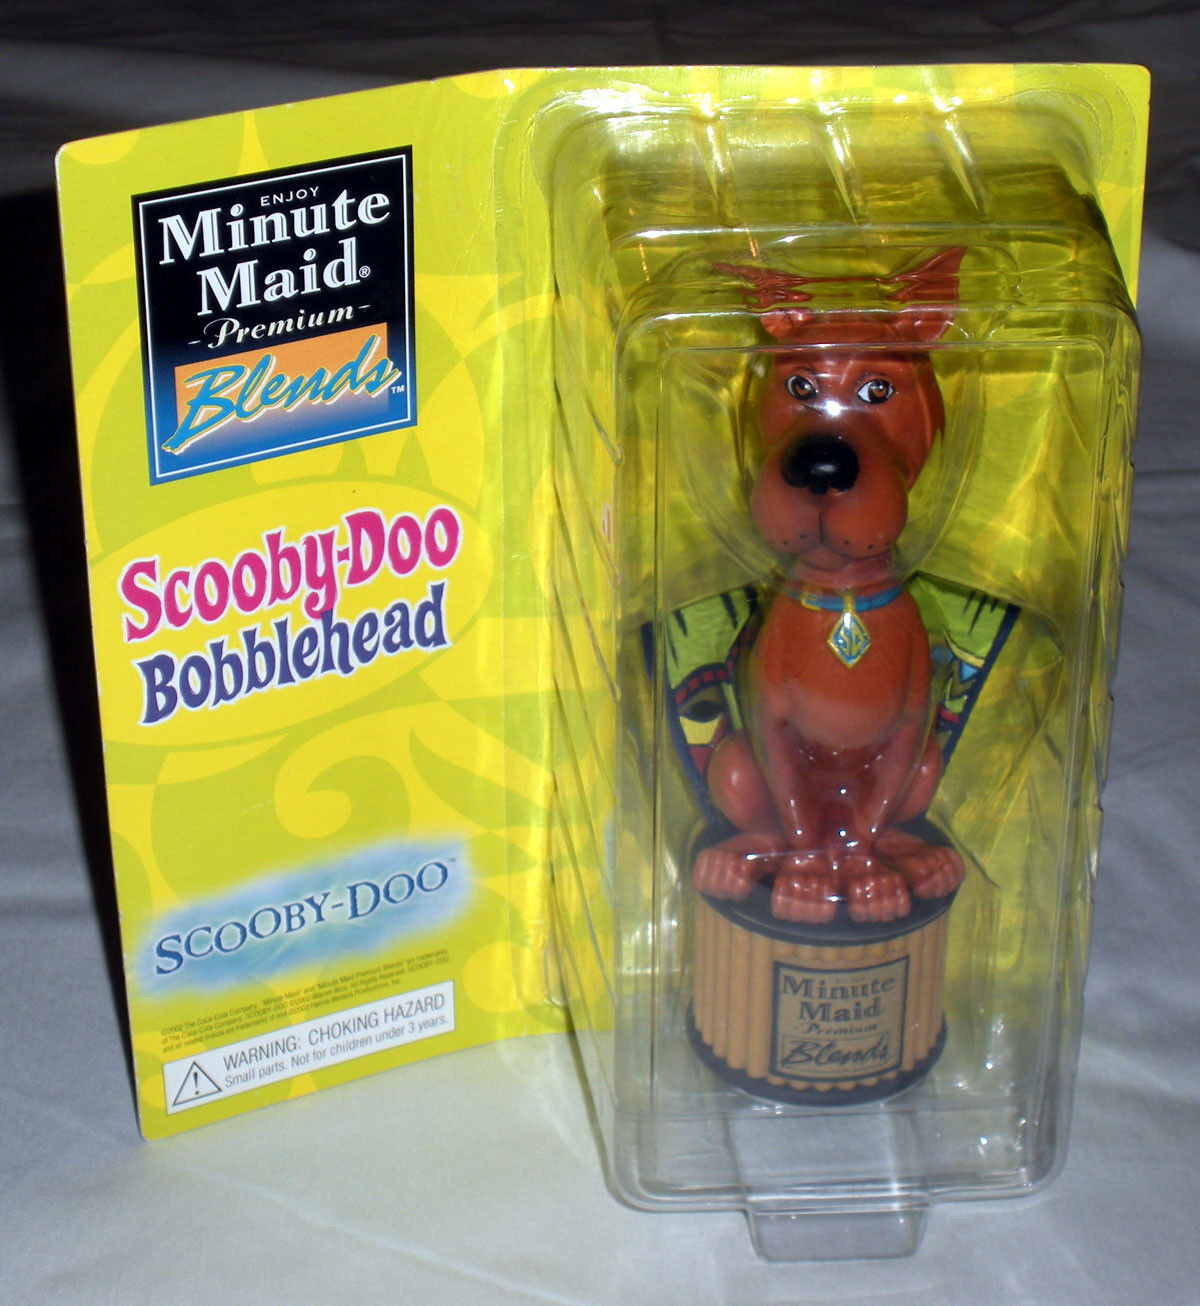 Scooby Doo Bobblehead Minute Maid Mail In  Promotional MOSC 2002 Coca Cola